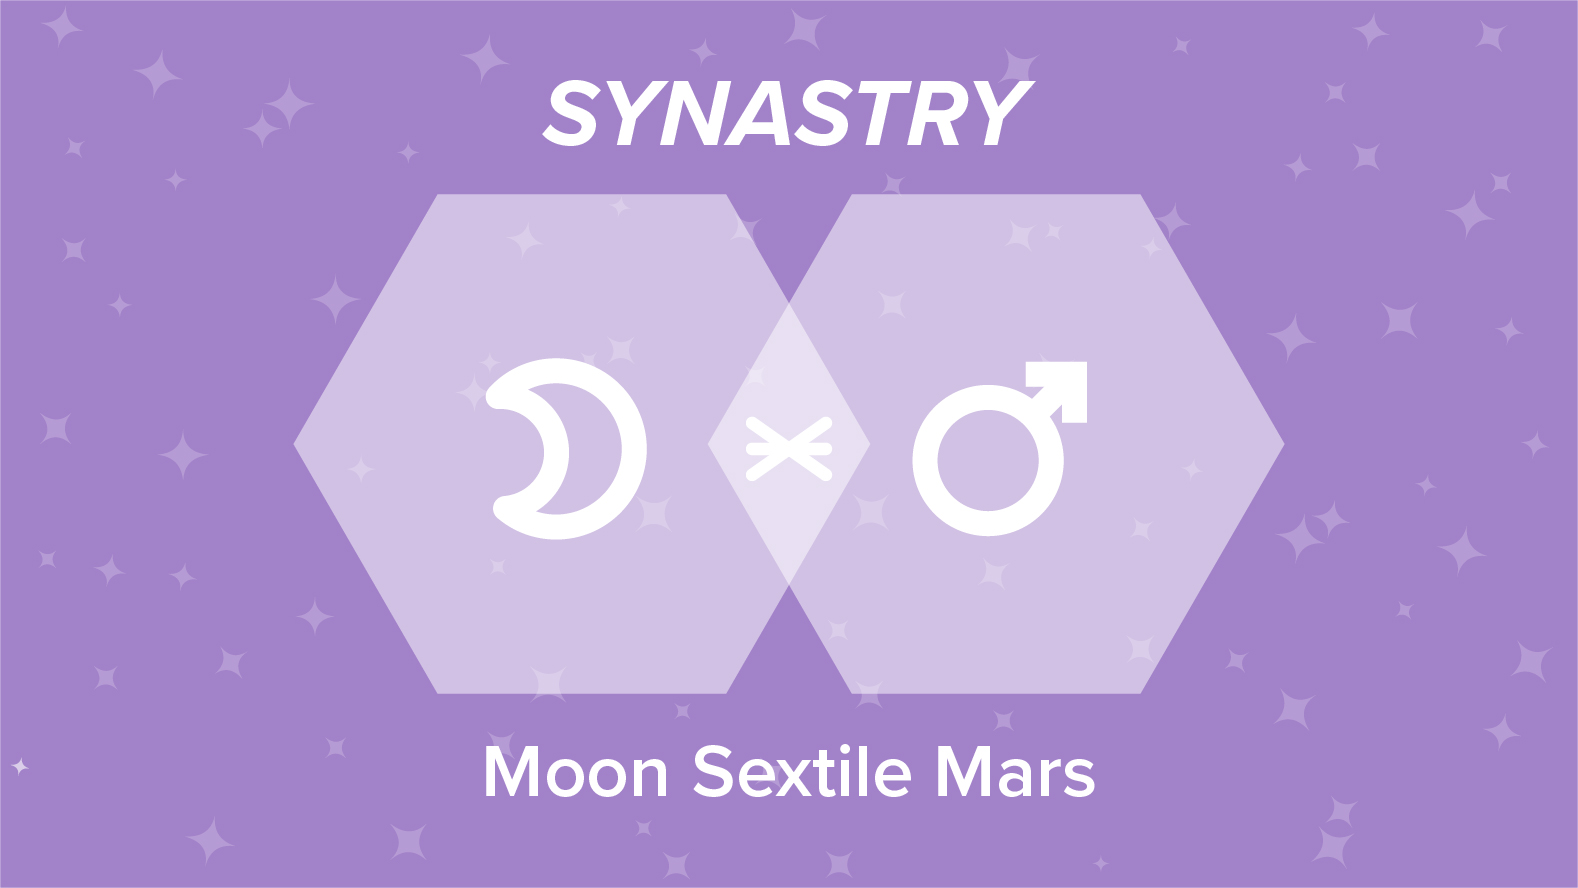 Moon Sextile Mars Synastry